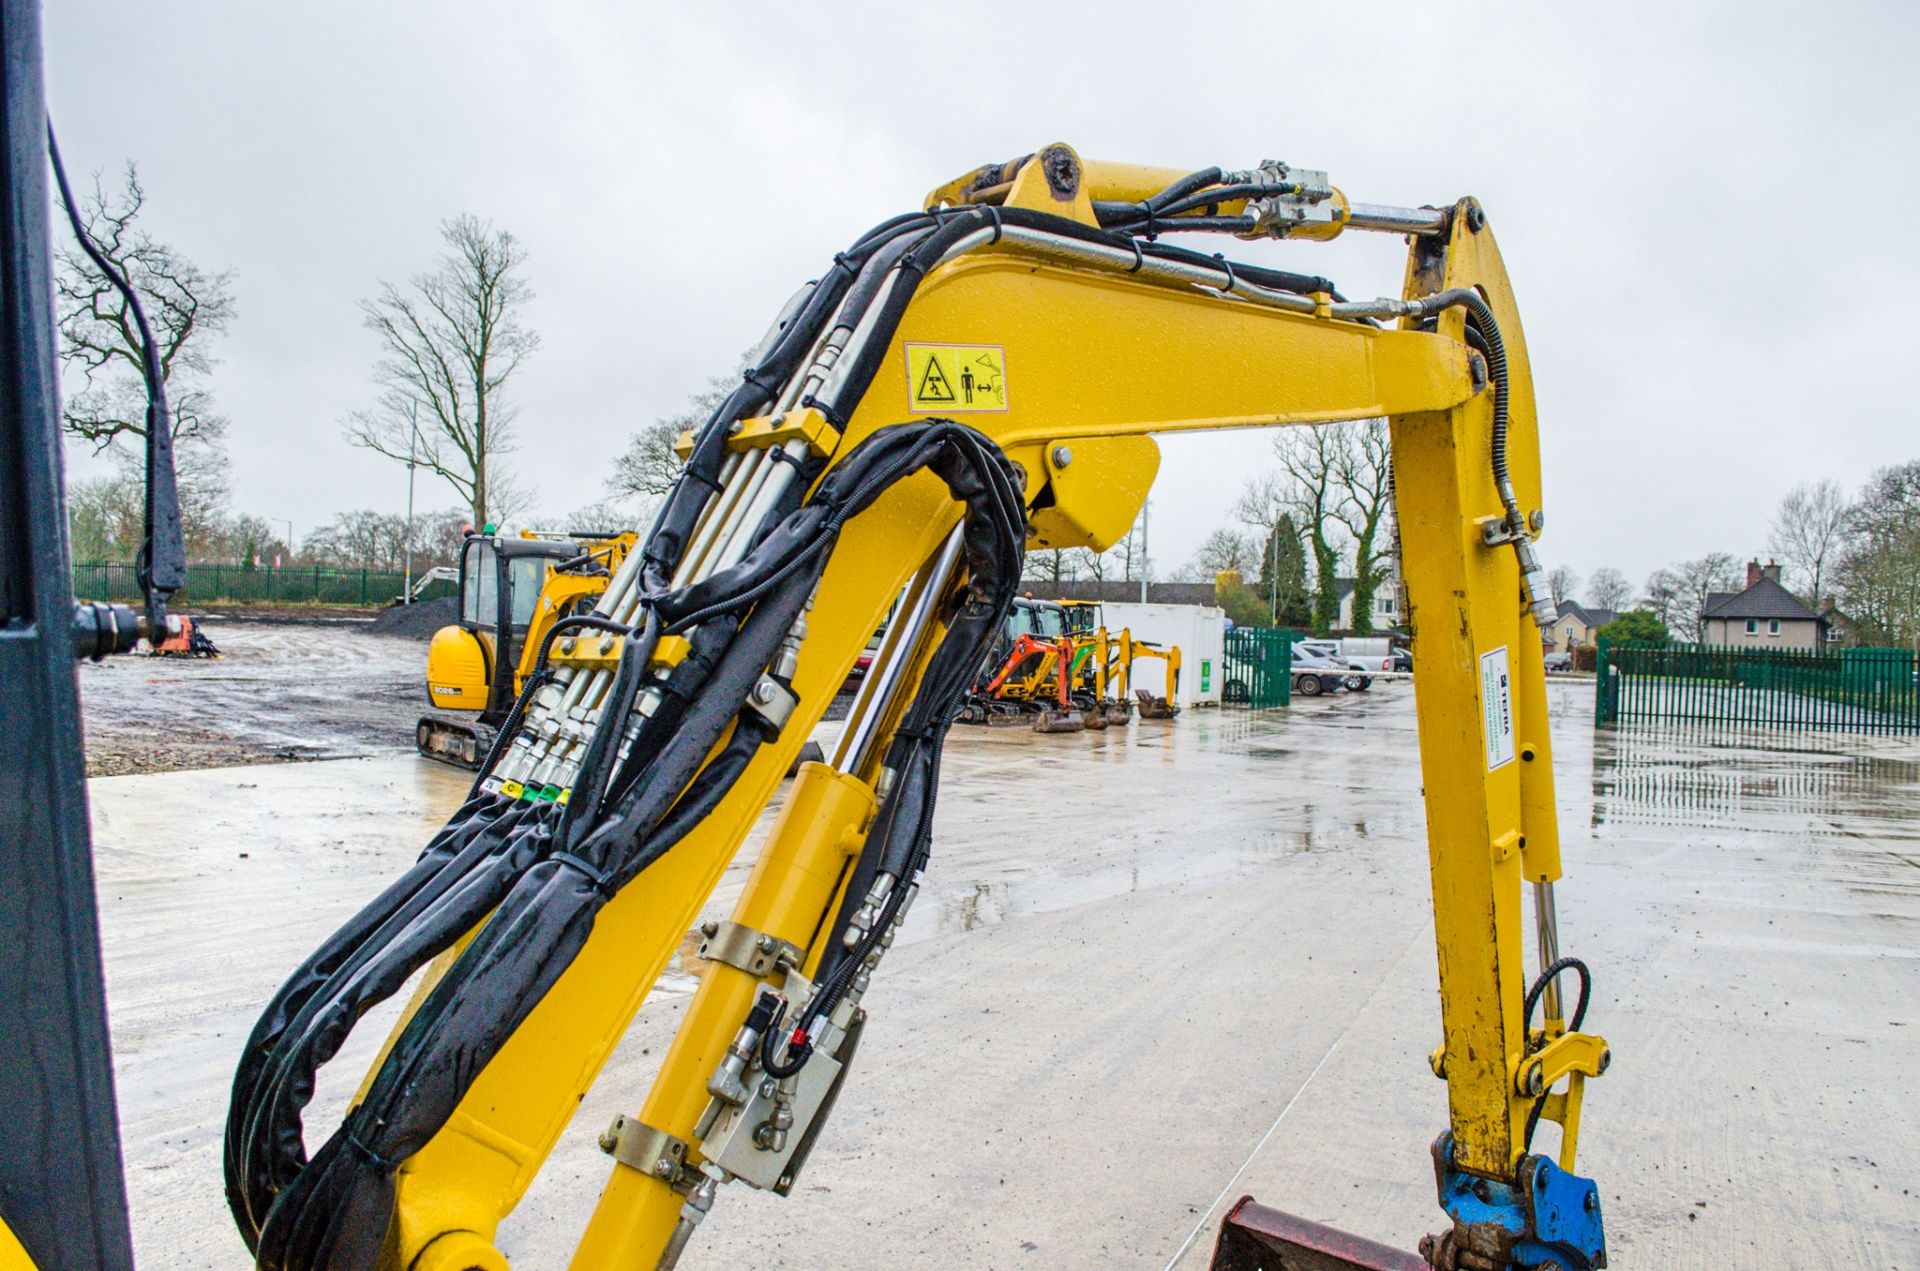 Komatsu PC26MR-3 2.6 tonne rubber tracked mini excavator Year: 2019 S/N: 33785 Recorded Hours: - Image 11 of 22